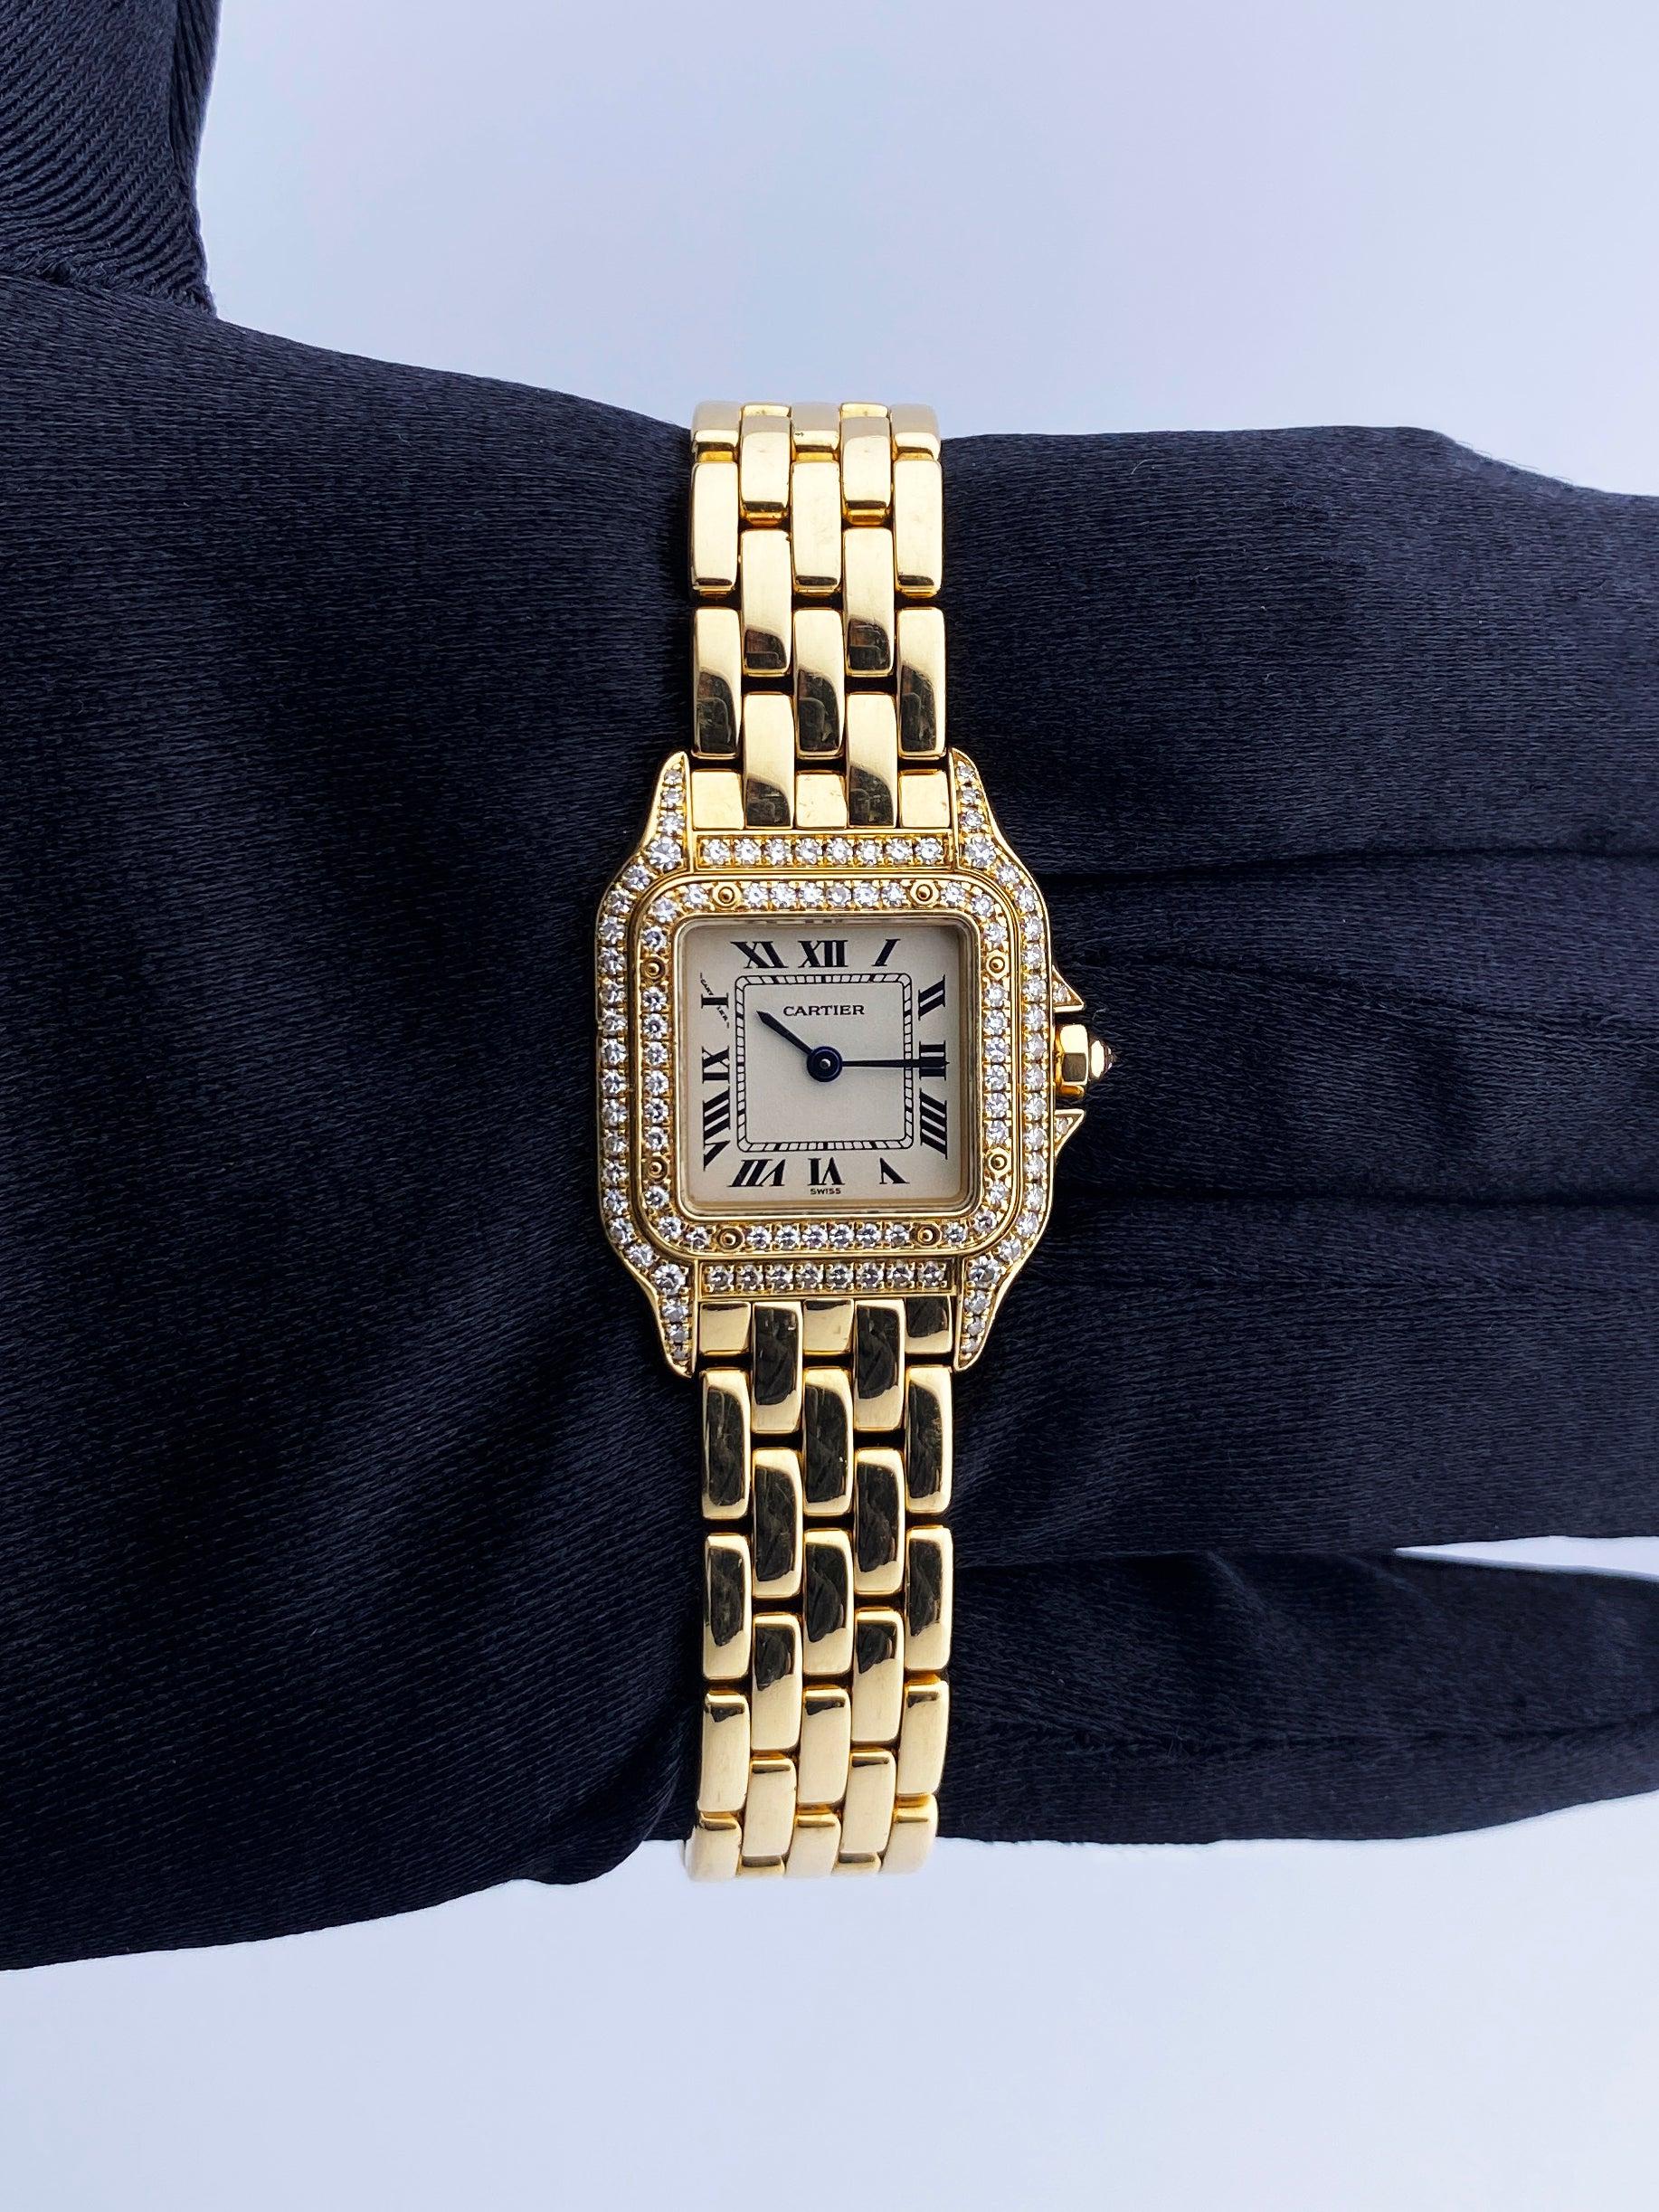 Cartier Panthere 1280 Ladies Watch. 22mm 18K yellow gold & original factory diamond set case.  18K yellow gold bezel with original factory diamond set. Off-white dial with black Roman numeral hour marker and blue hands. 18K yellow gold bracelet with